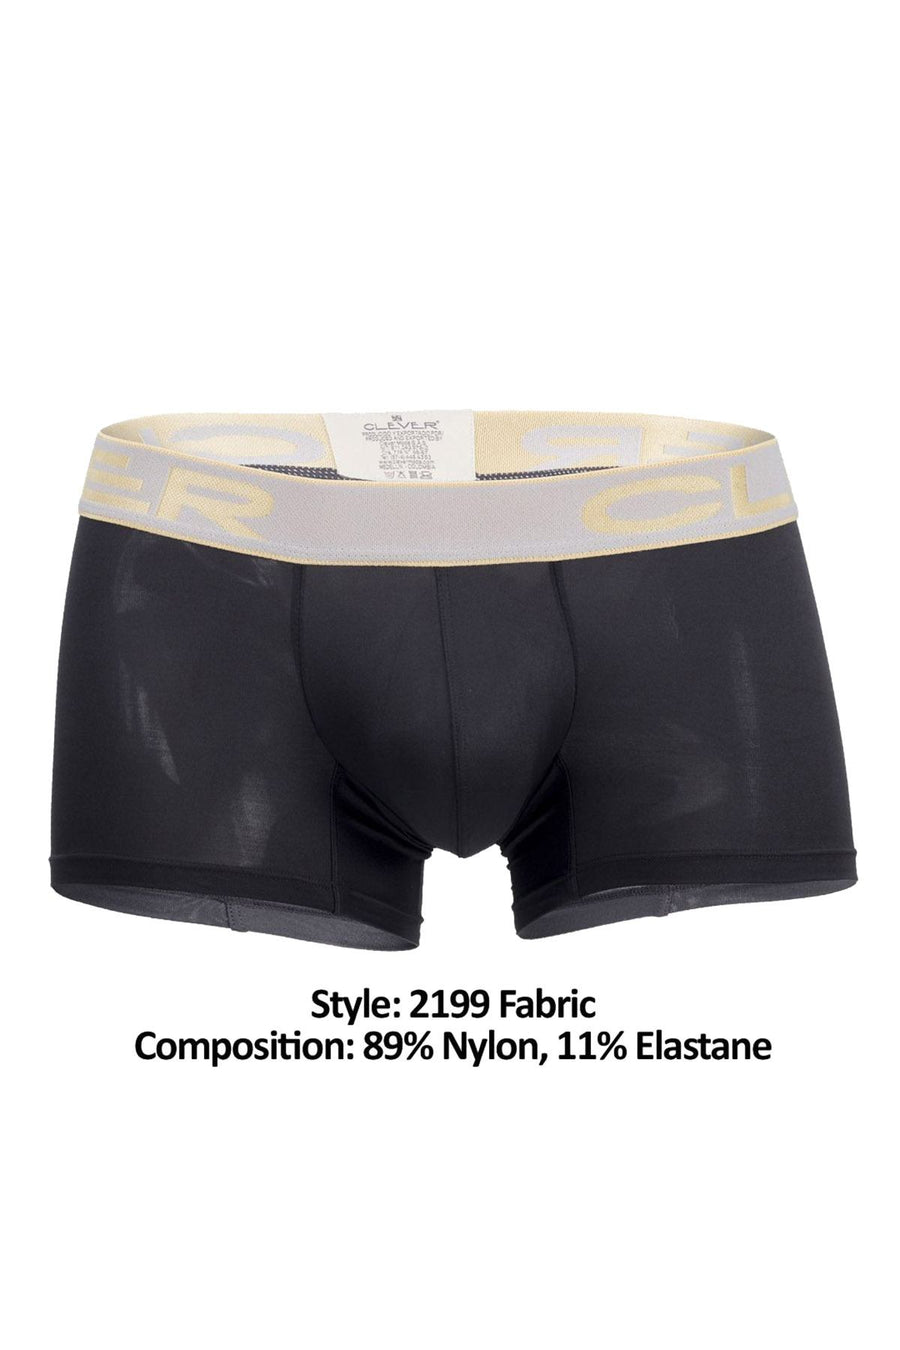 Clever Black/Grey Limited Edition Trunk – CheapUndies